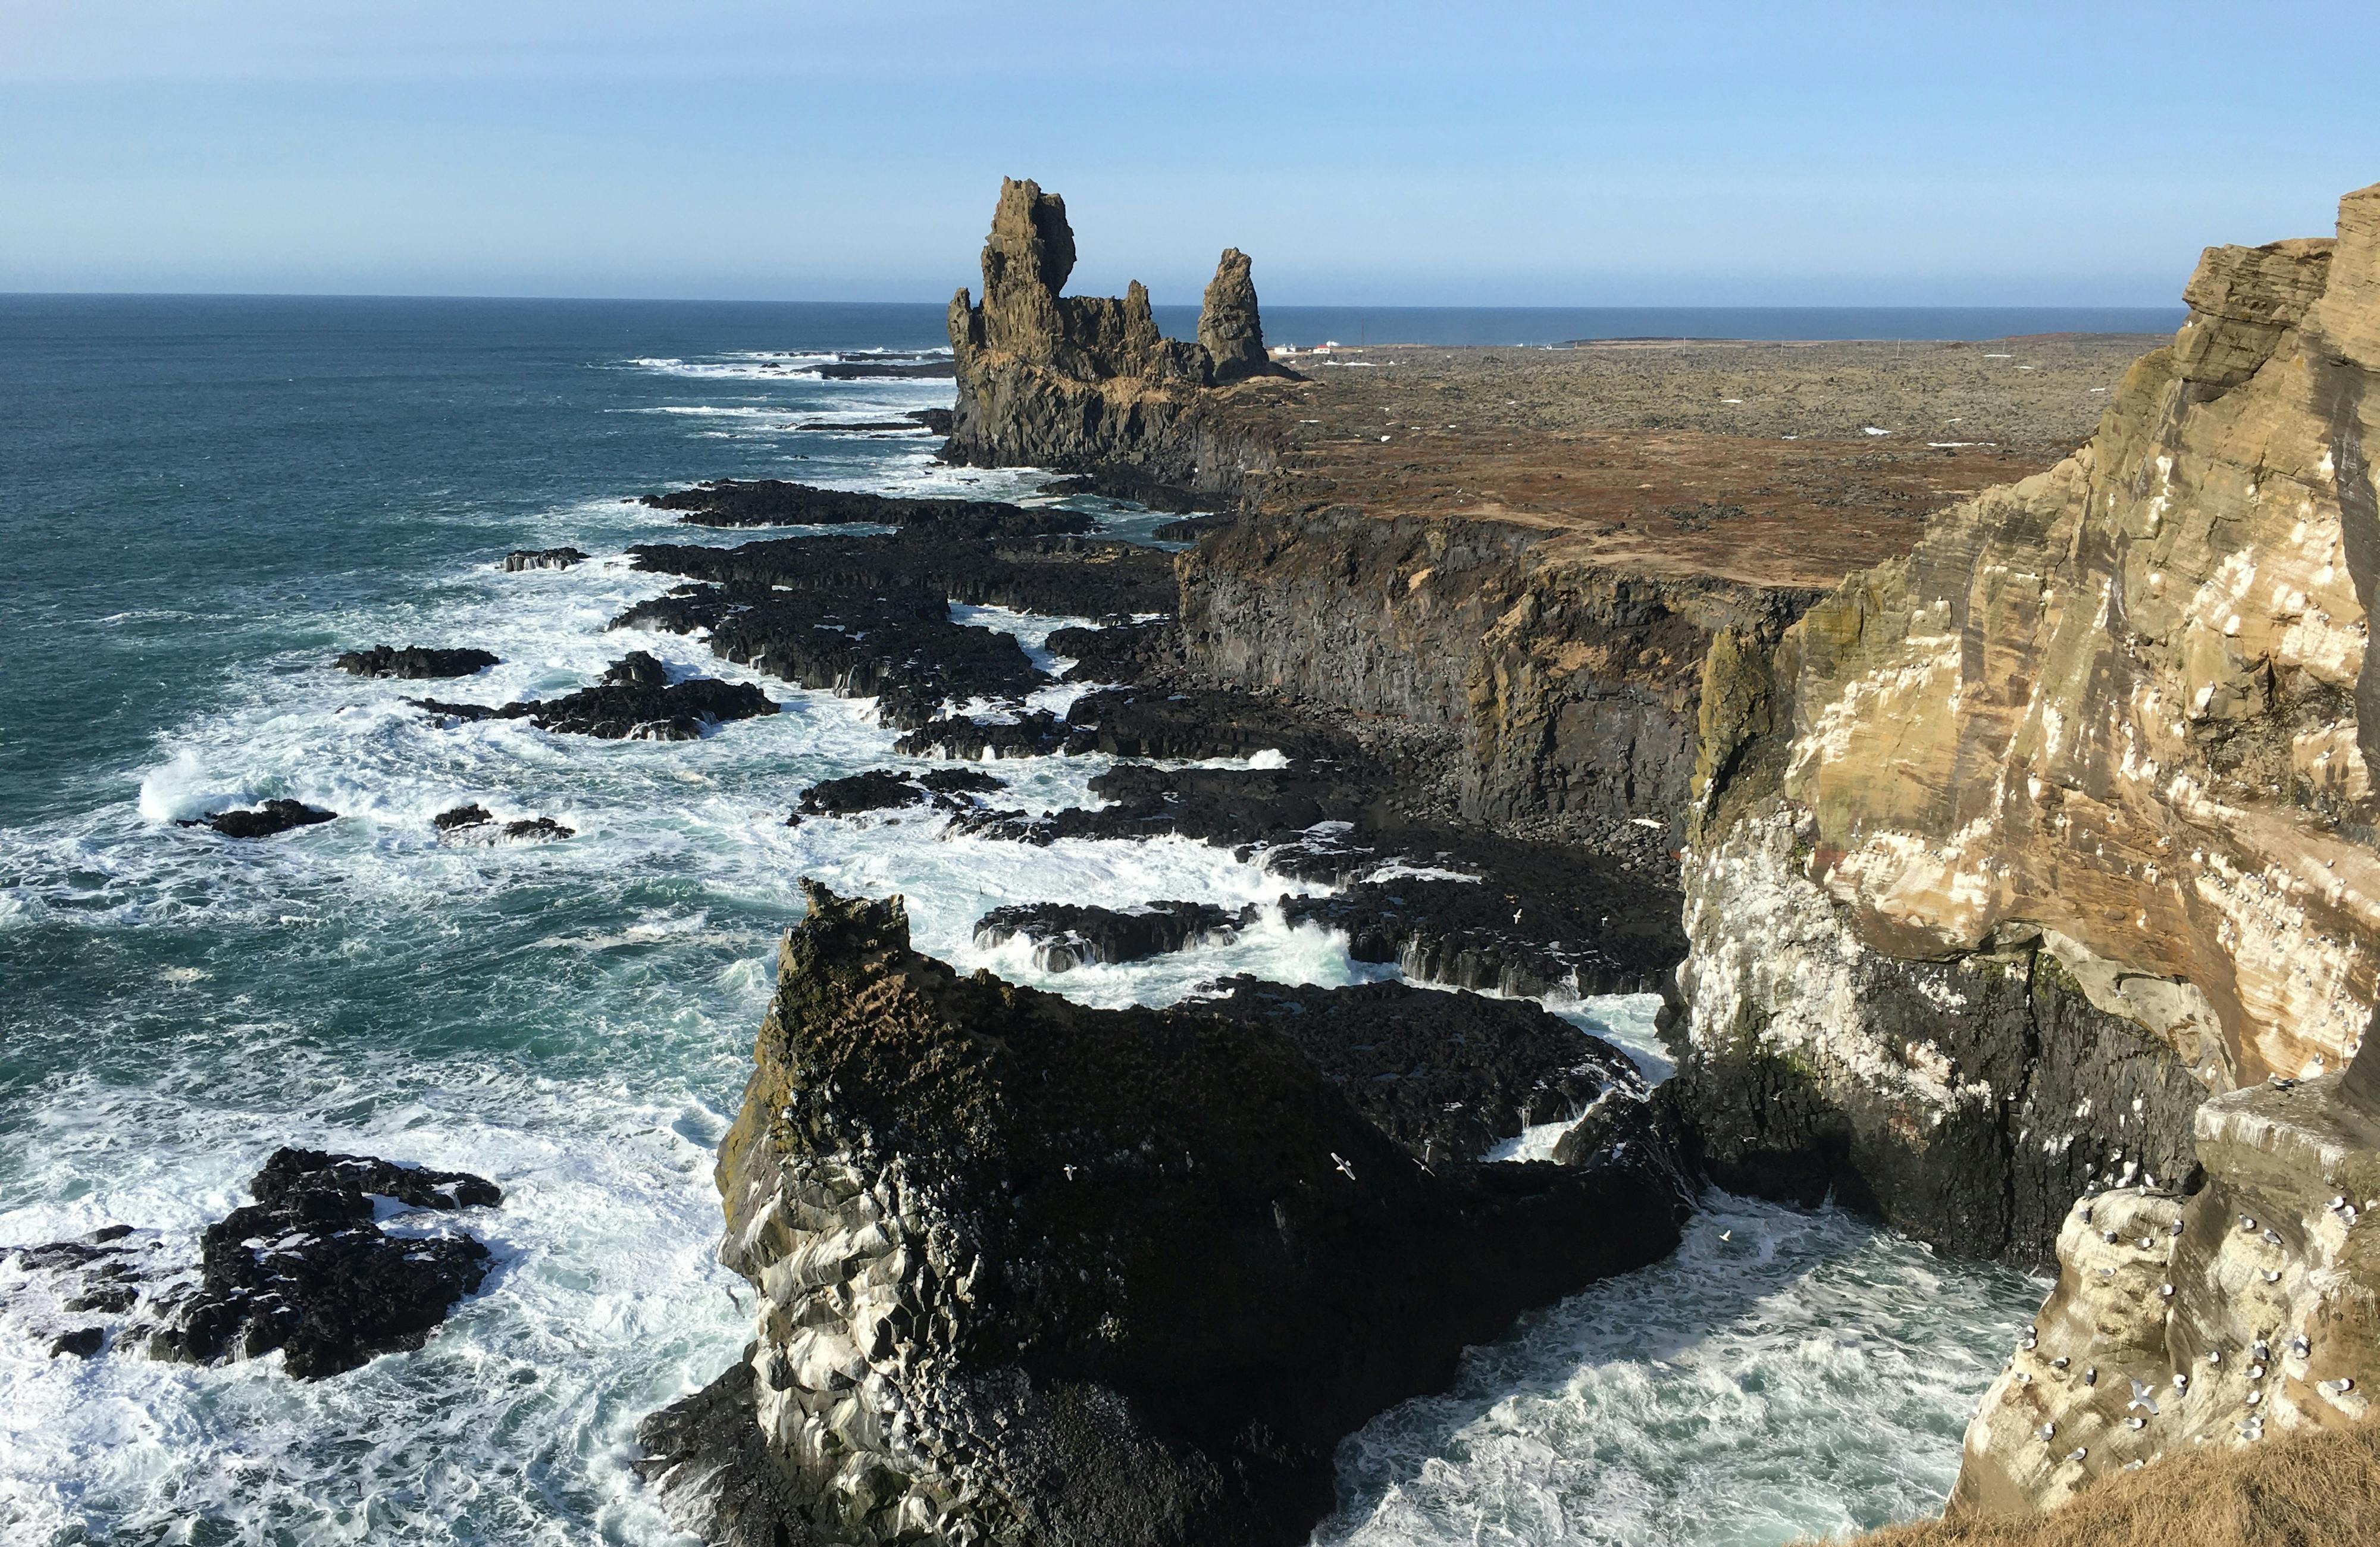 A bird cliff and sea stacks rising from a rugged coastline